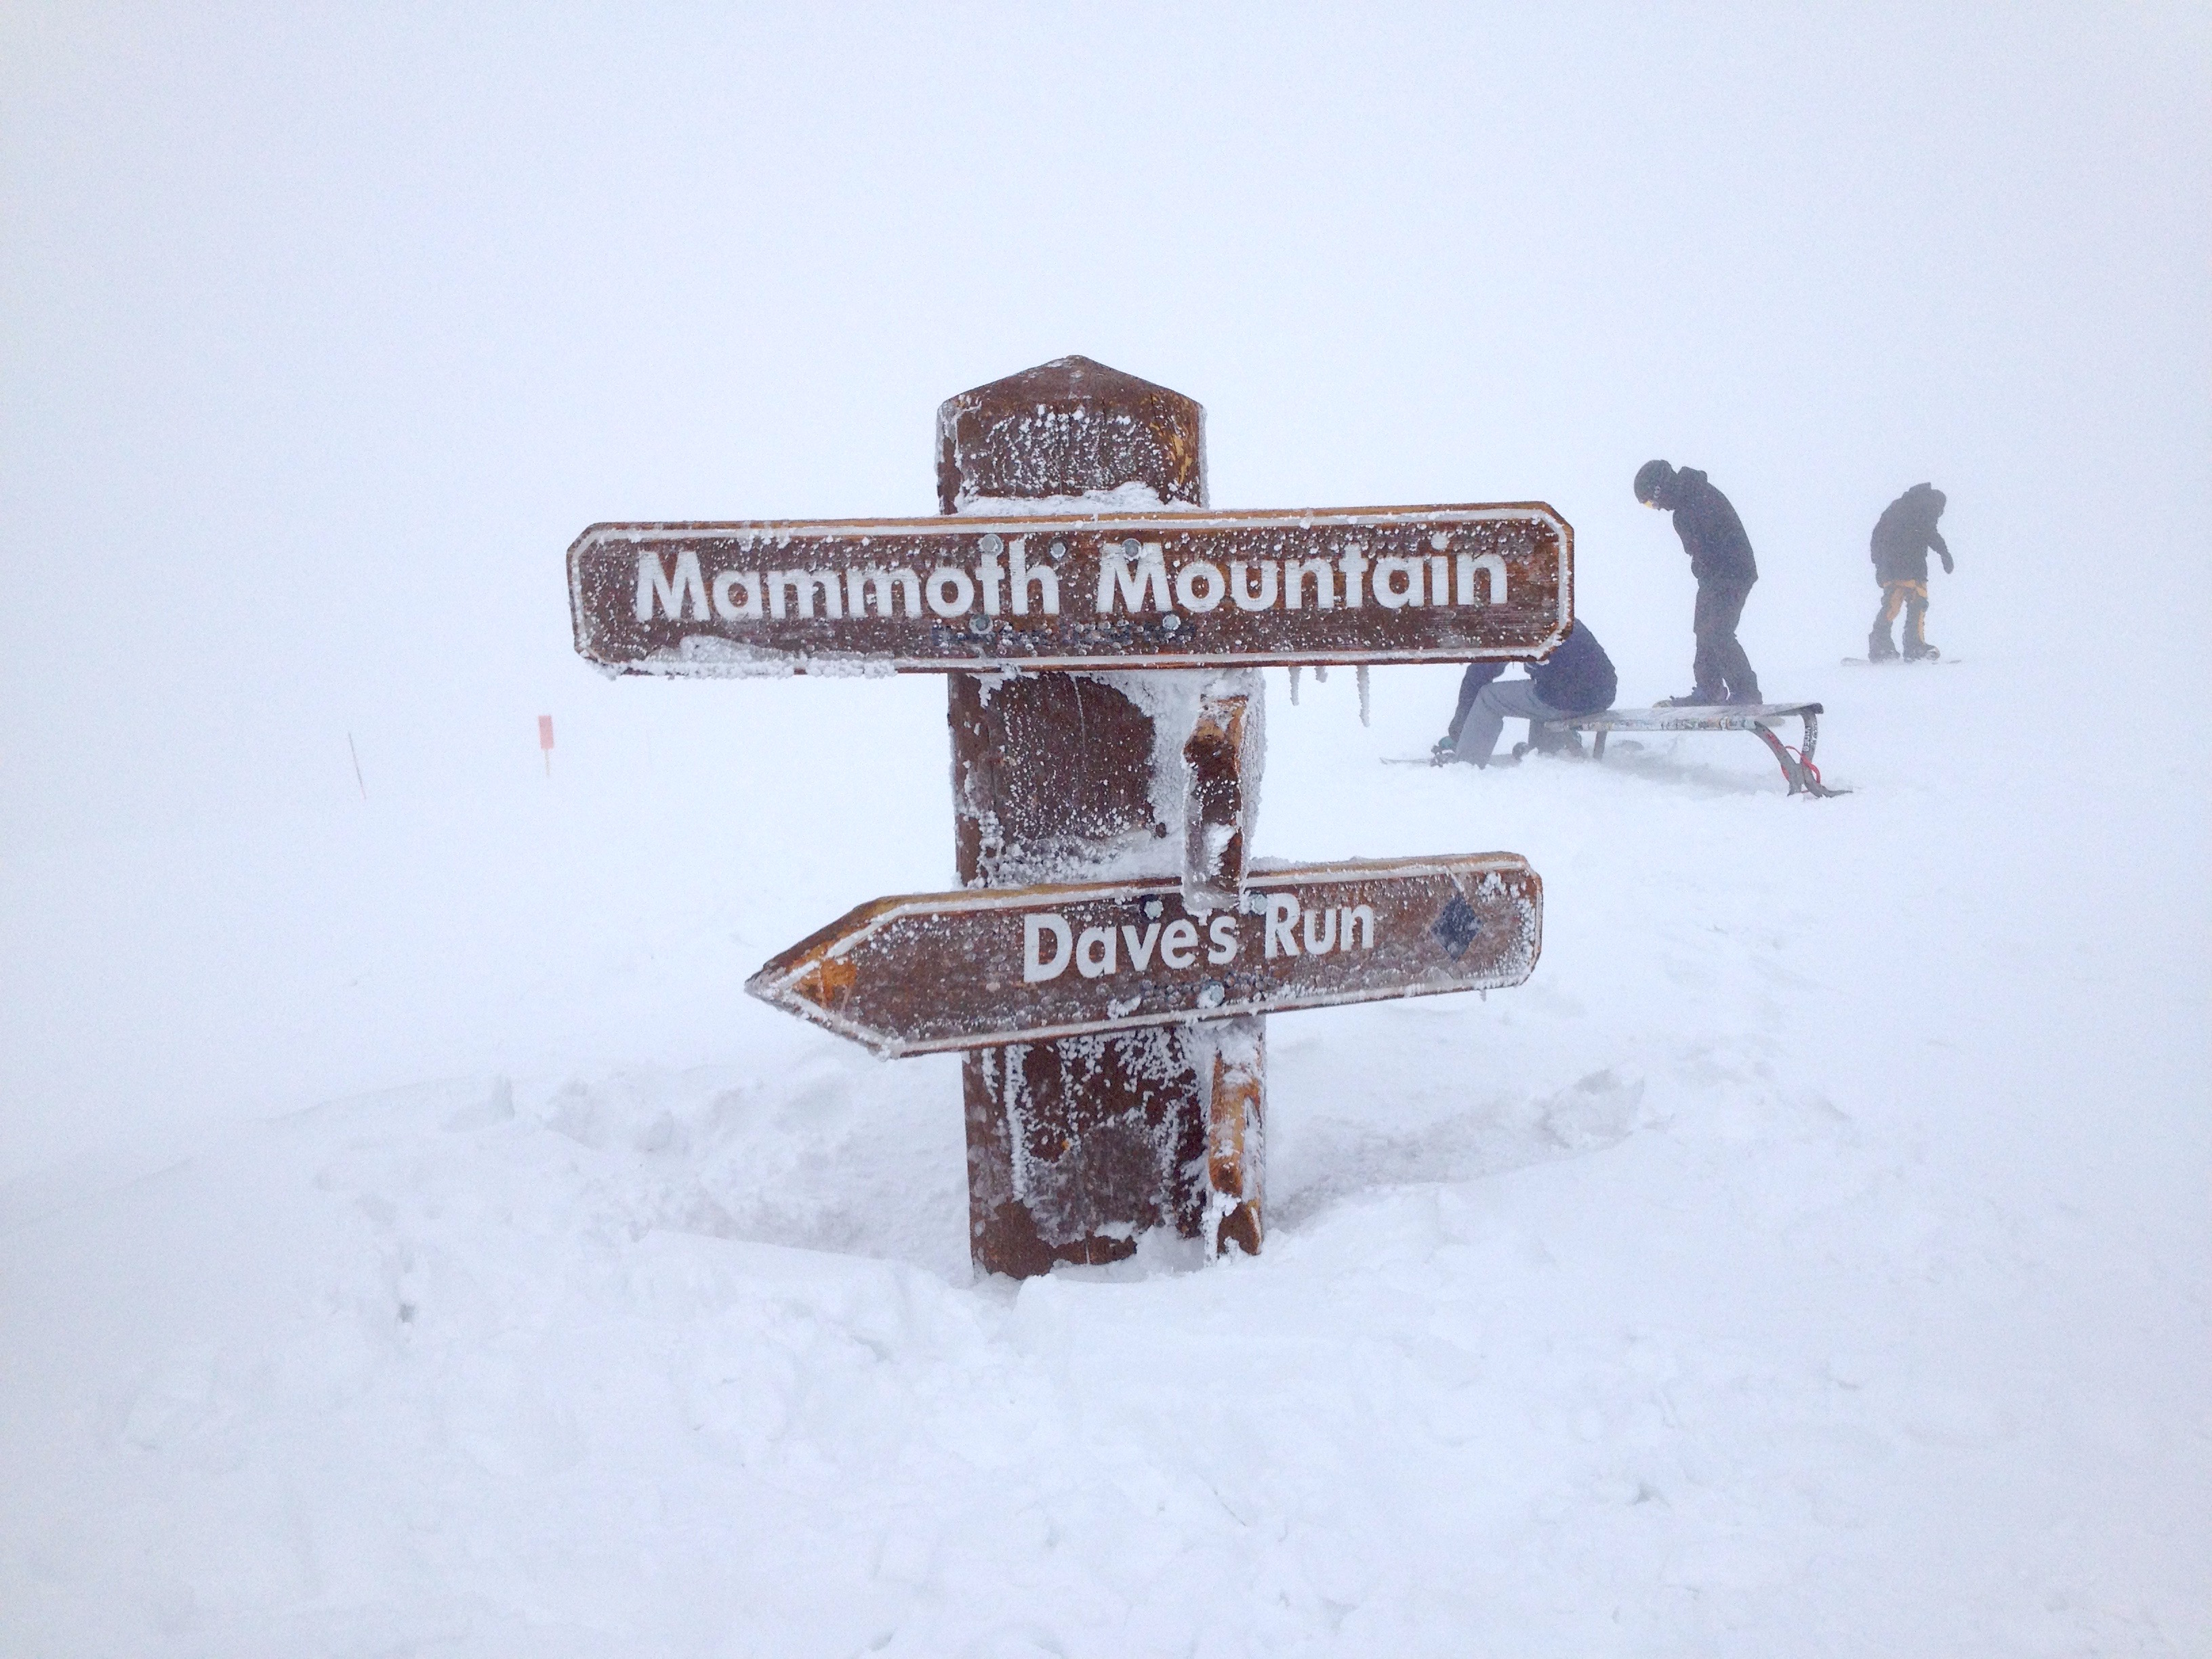 This sign is usually 30-feet tall.... photo: snowbrains